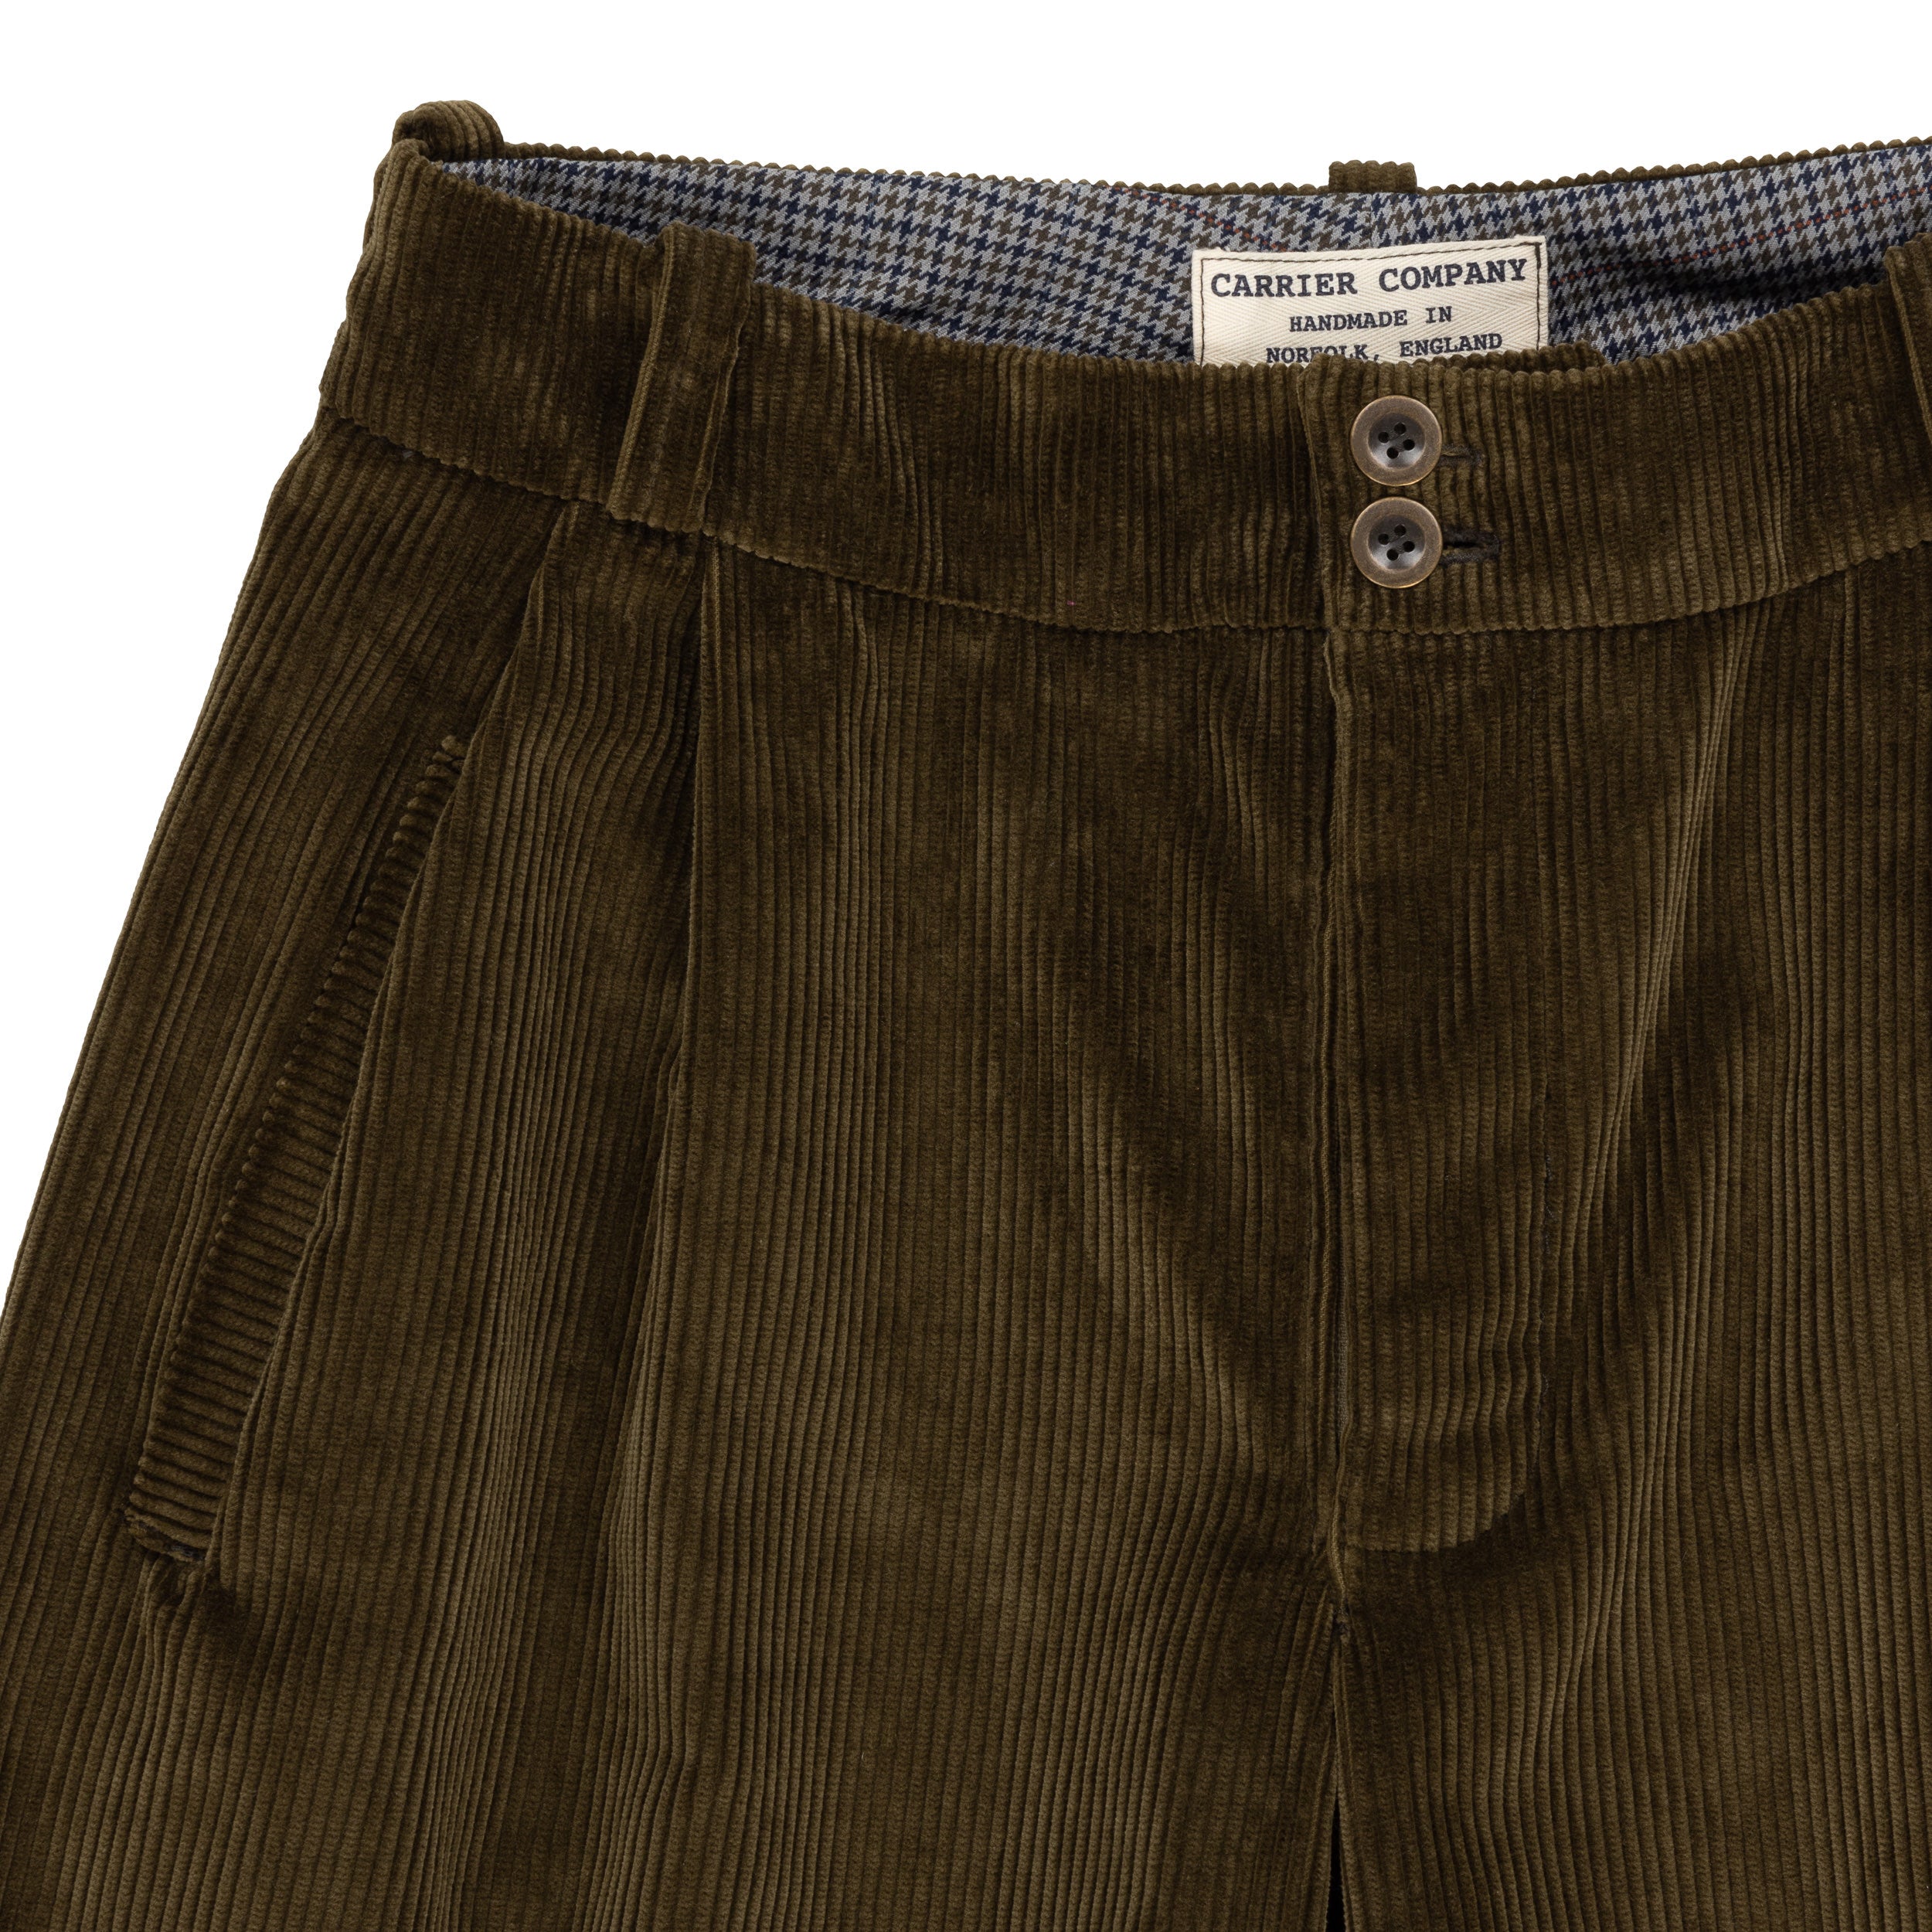 Carrier Company Dutch Trouser in Corduroy